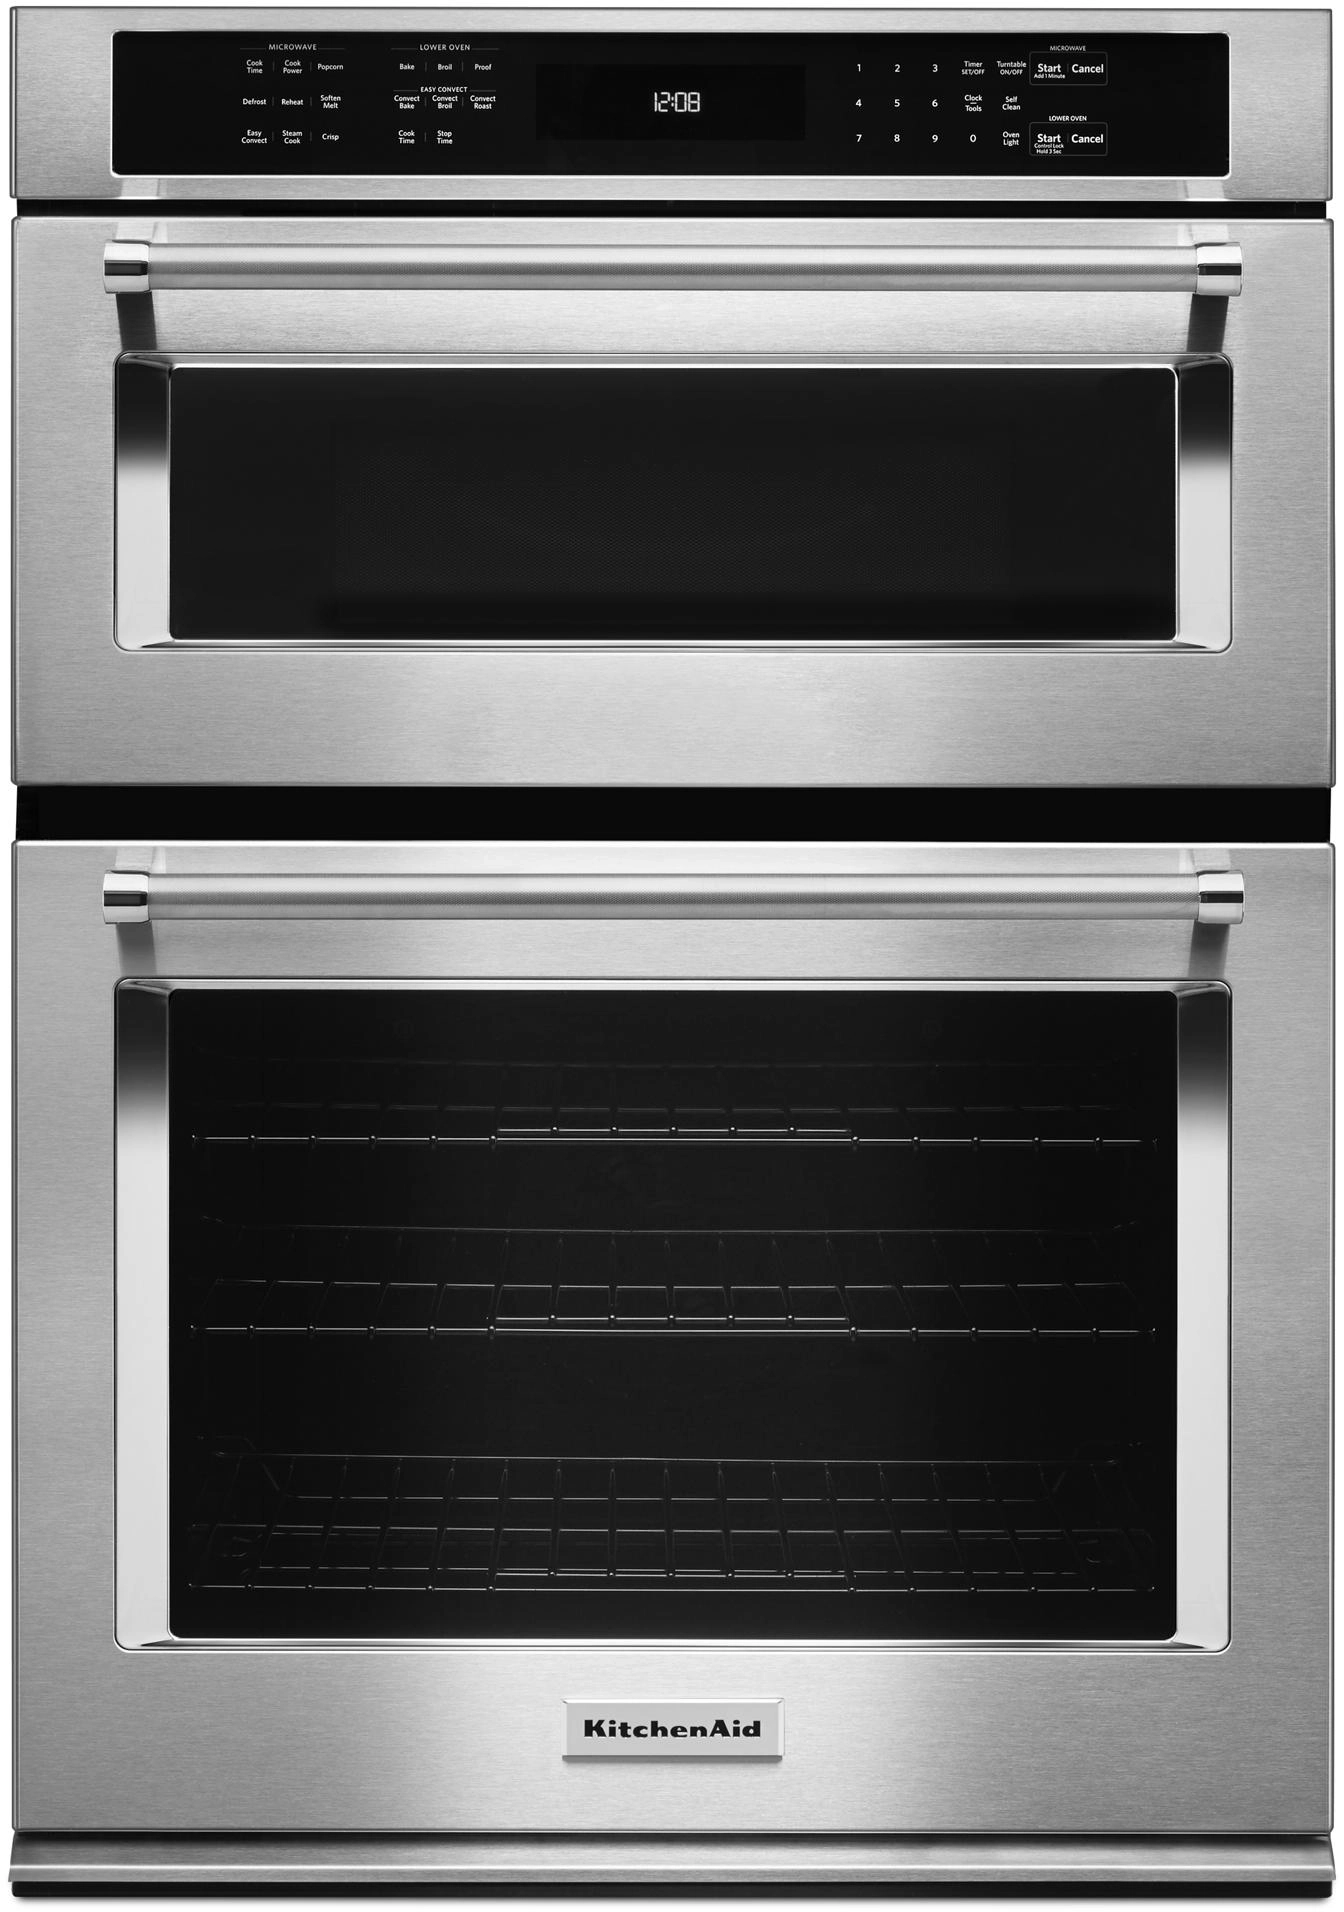 KitchenAid KOCE500ESS 30 Inch Built-In Combination Wall Oven with Even Heat True Convection